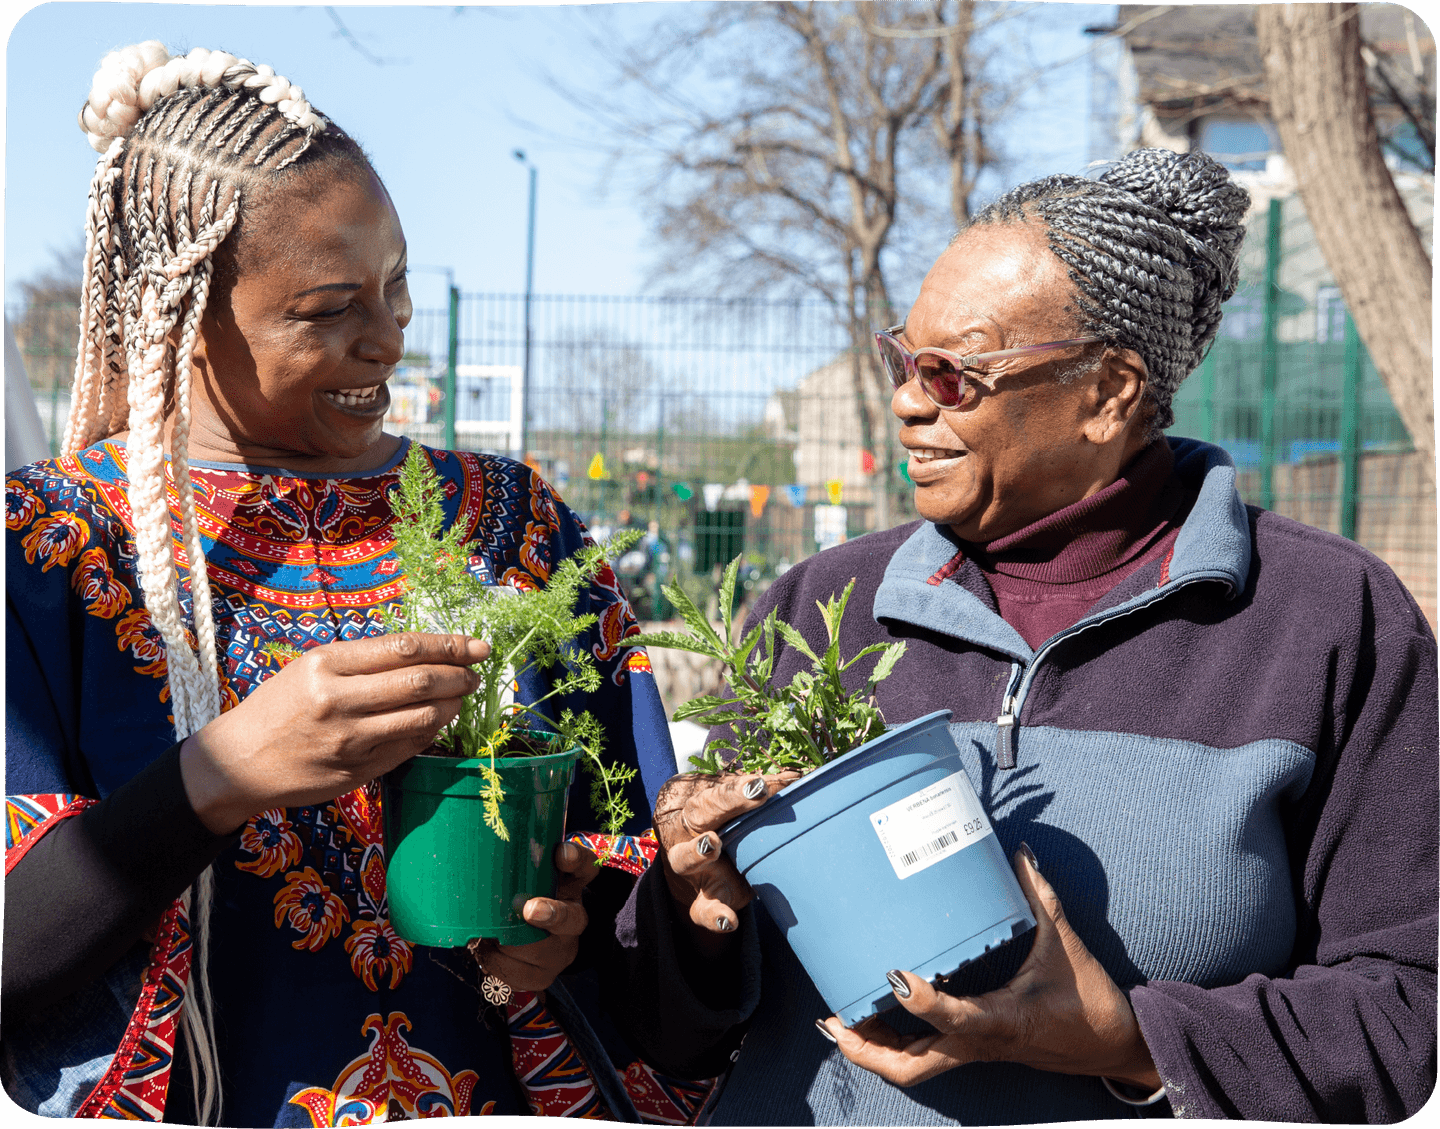 Two black women stand outside and lean in towards one an other, smiling as they hold potted plants.